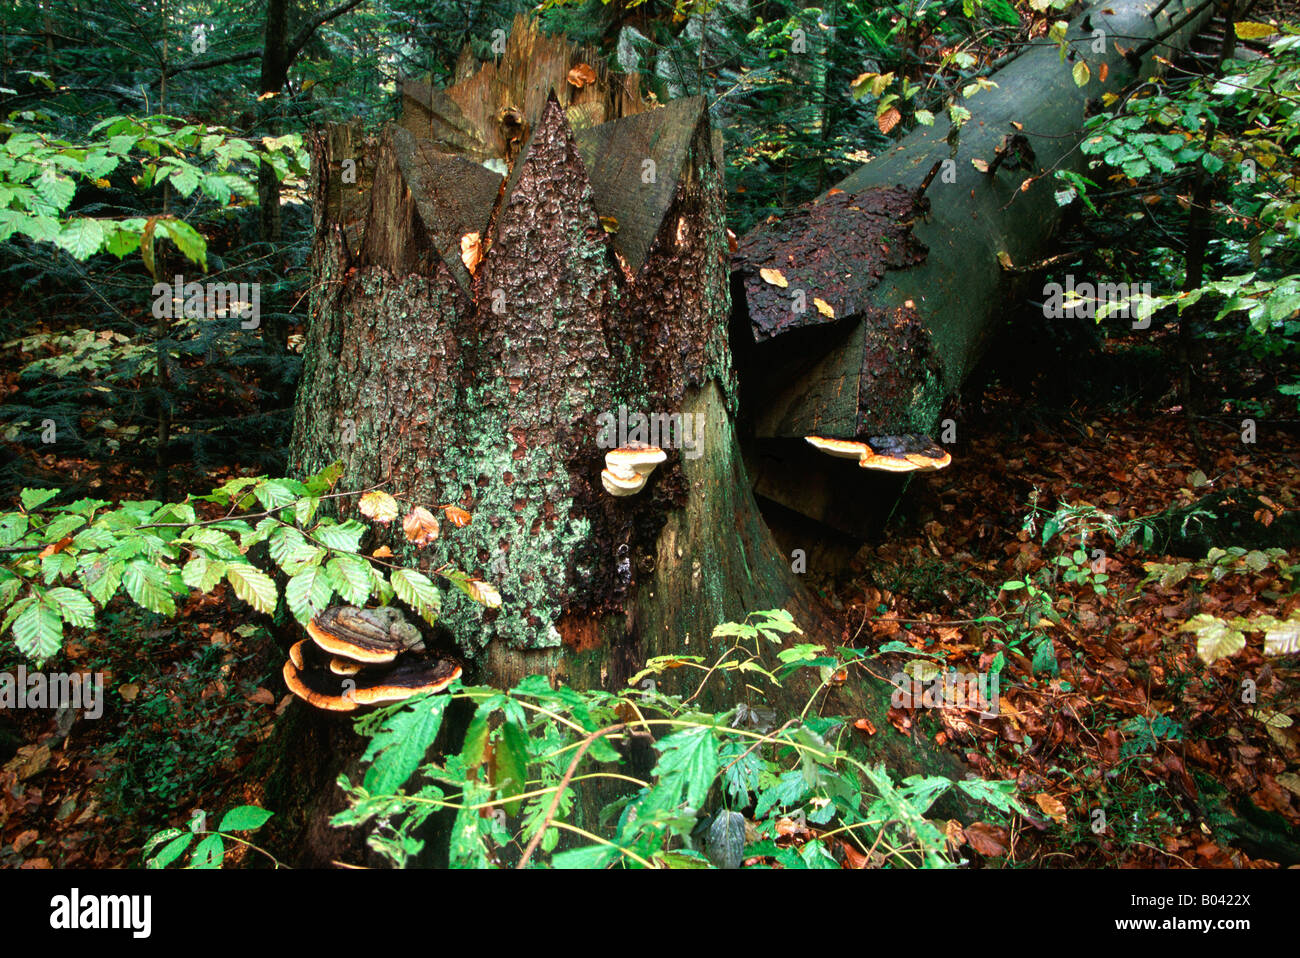 Bark Beetle Invasion in picea abies Forest Germany Stock Photo